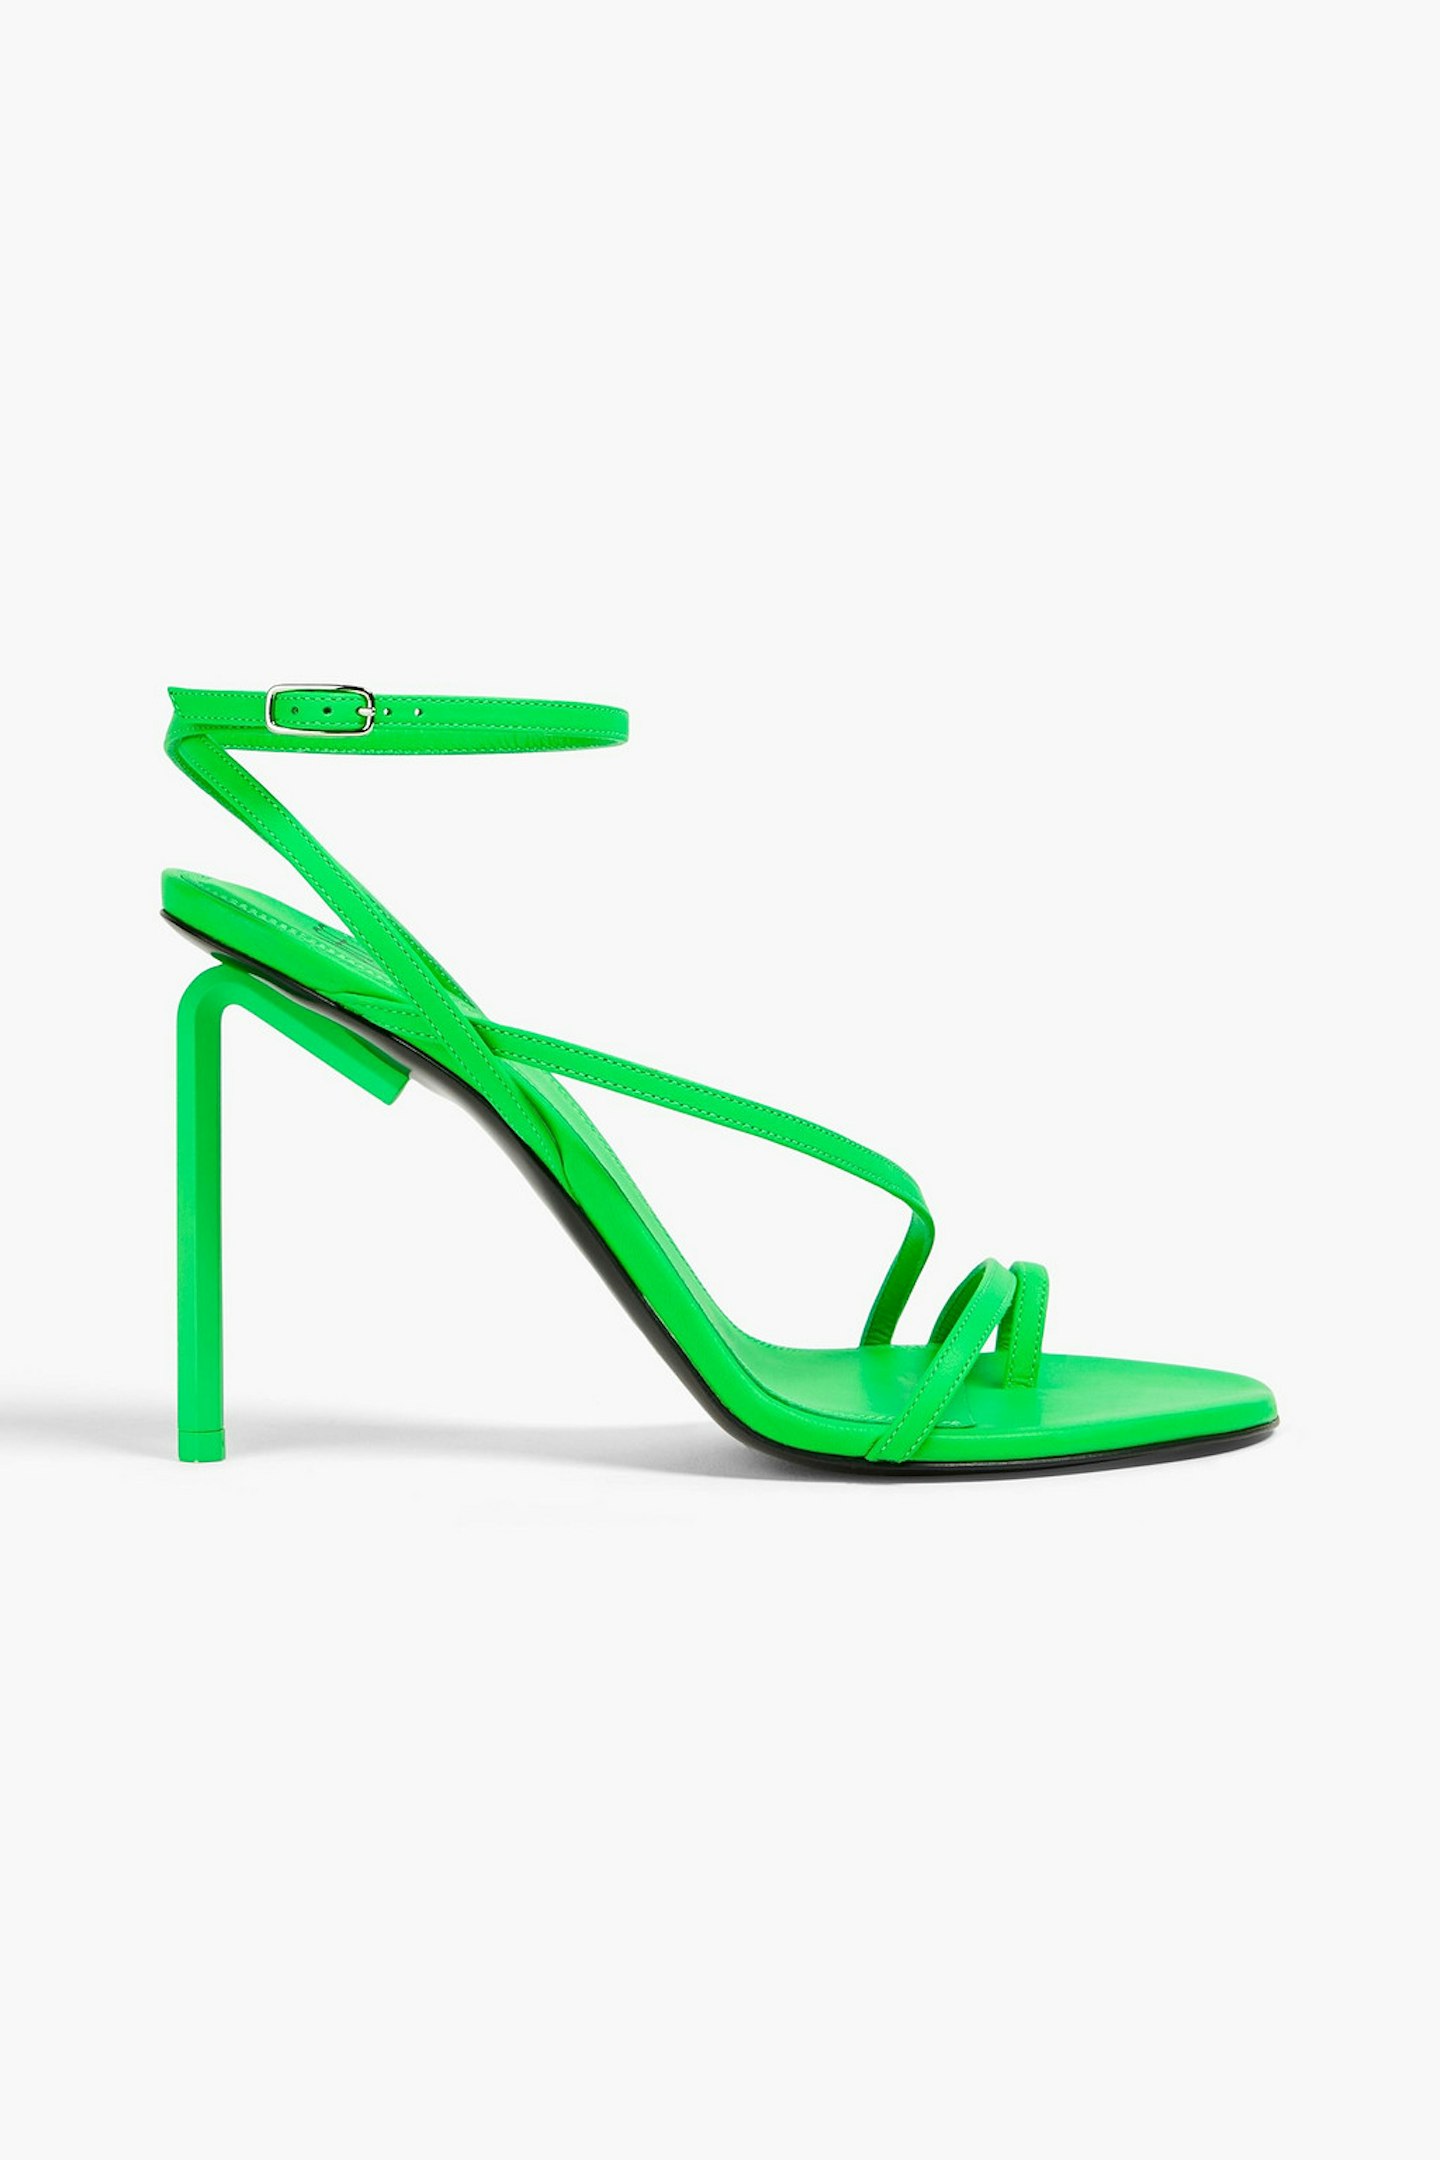 off white heels outnet sale